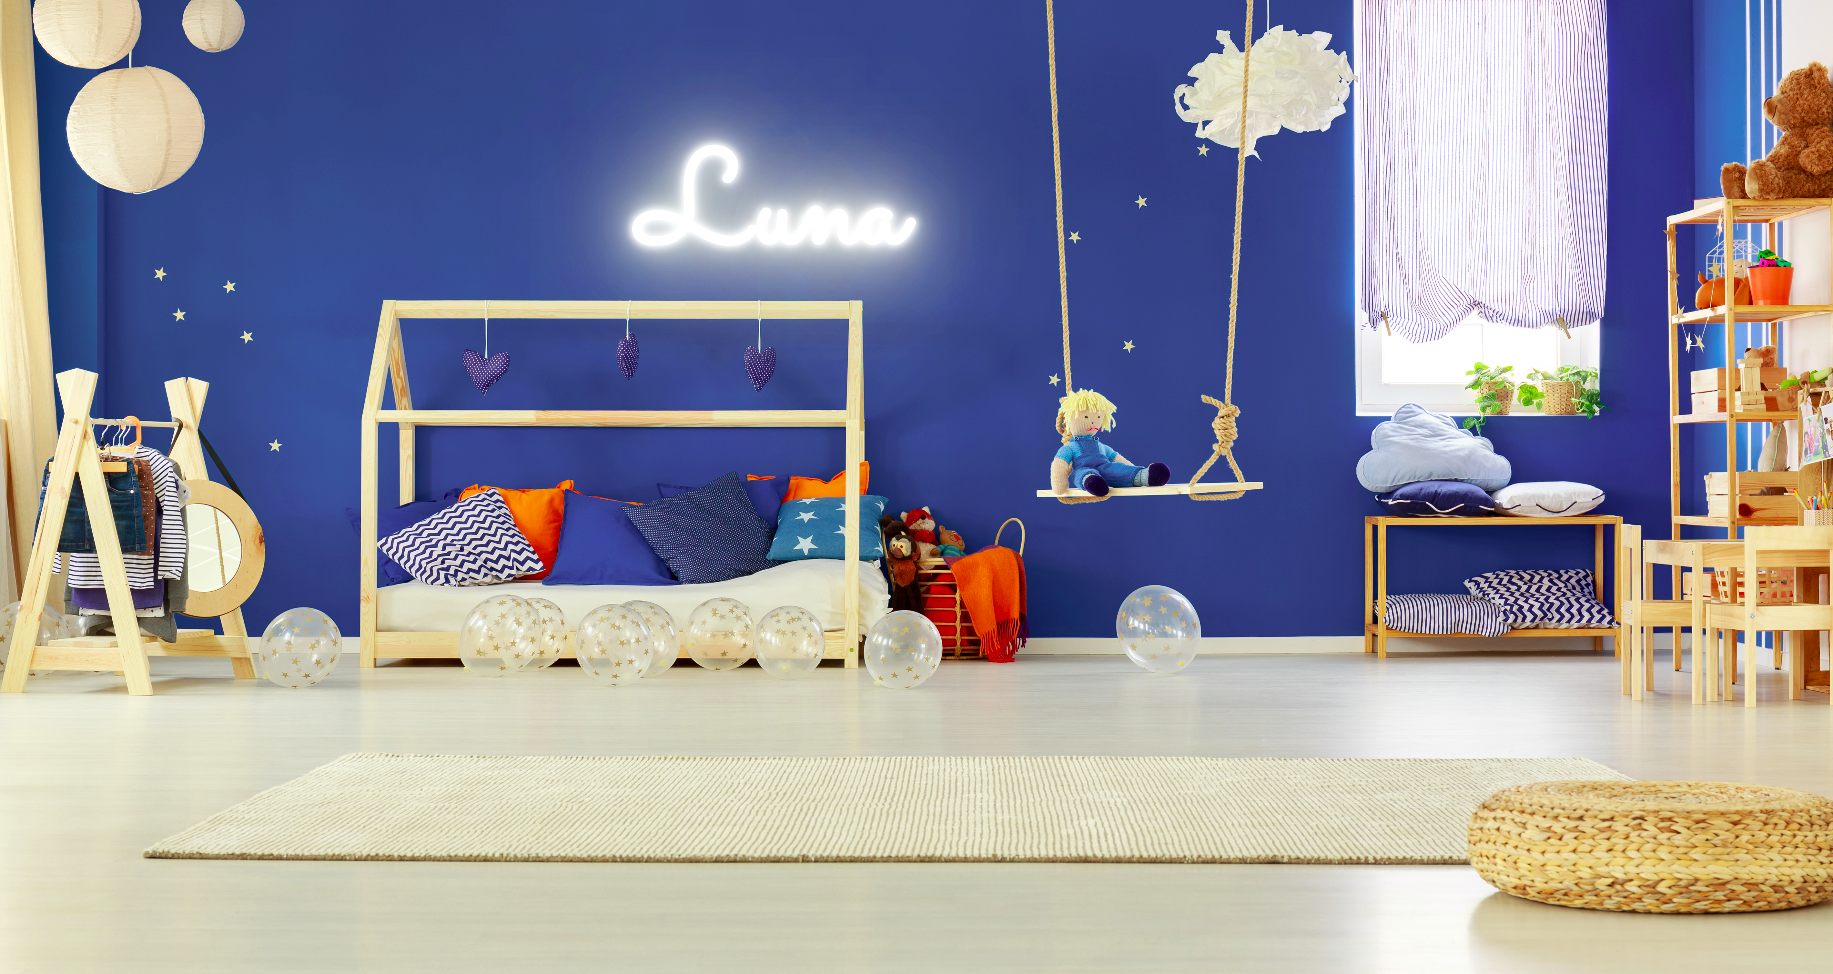 "Luna" Baby Name LED Neon Sign